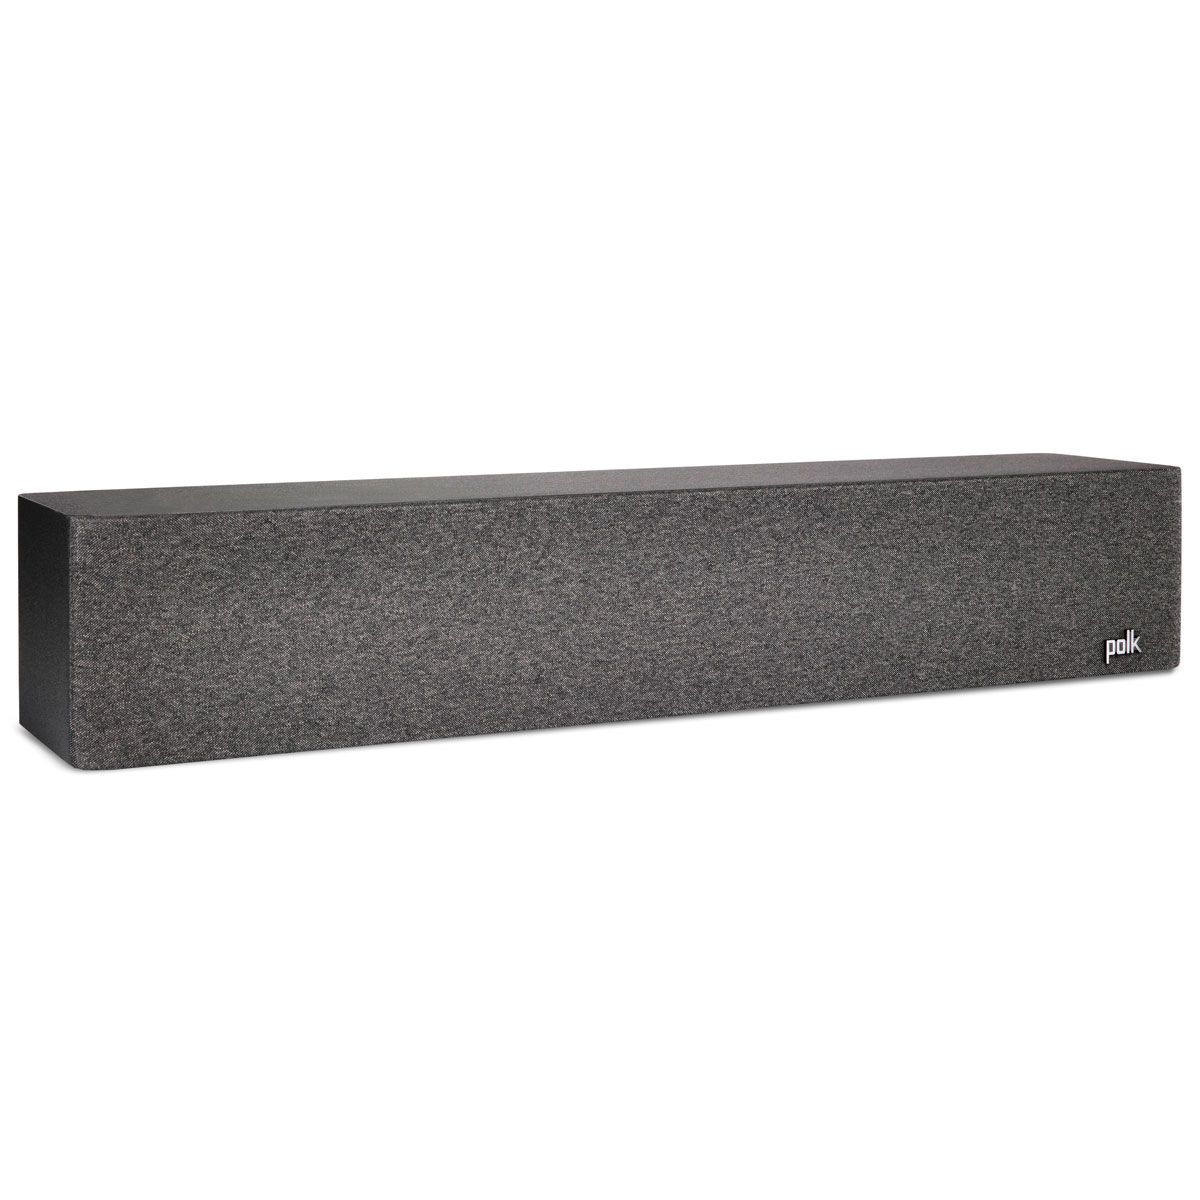 Polk Audio Reserve L350 Slim Center Channel LCR Speaker, front right angle with grille